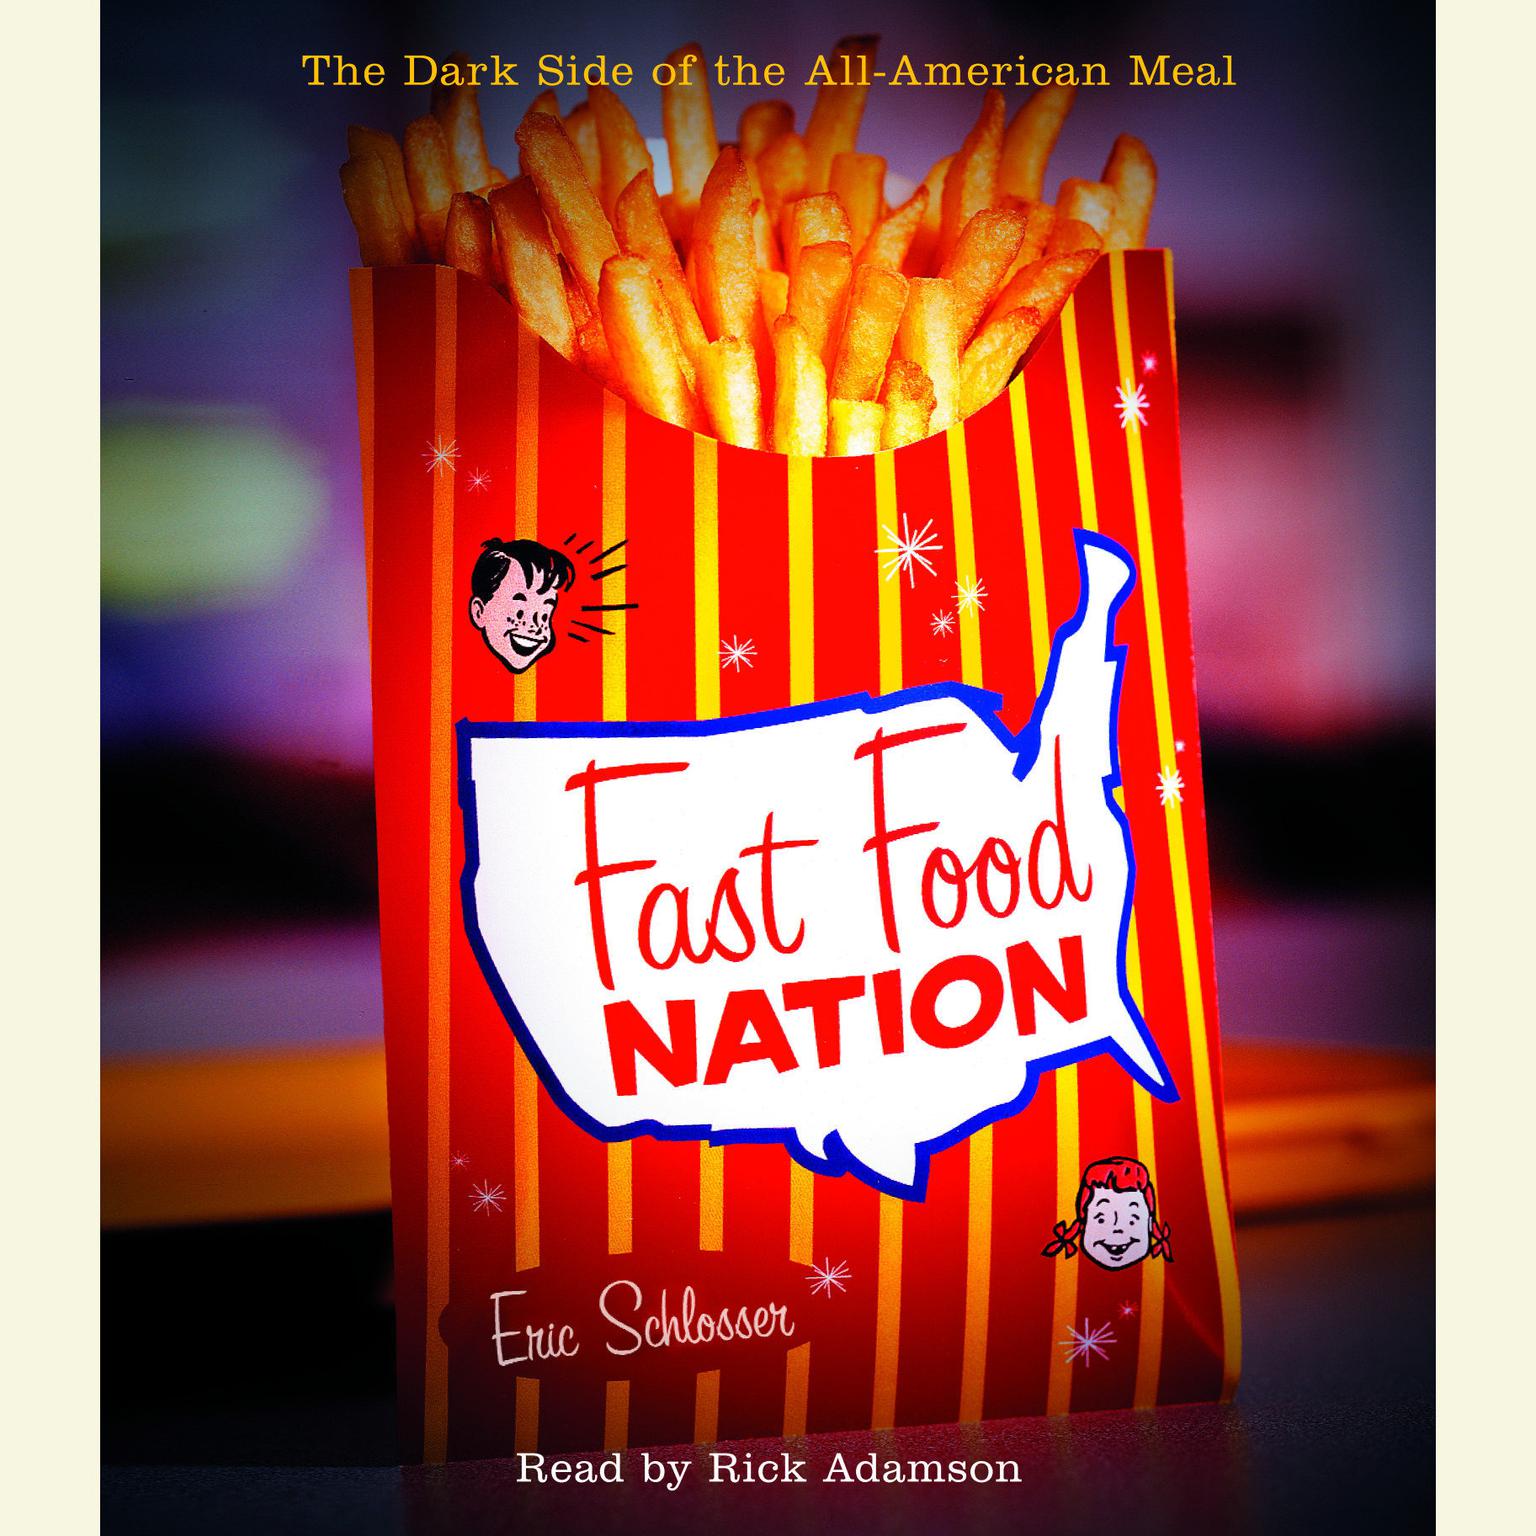 Fast Food Nation (Abridged): The Dark Side of the All-American Meal Audiobook, by Eric Schlosser